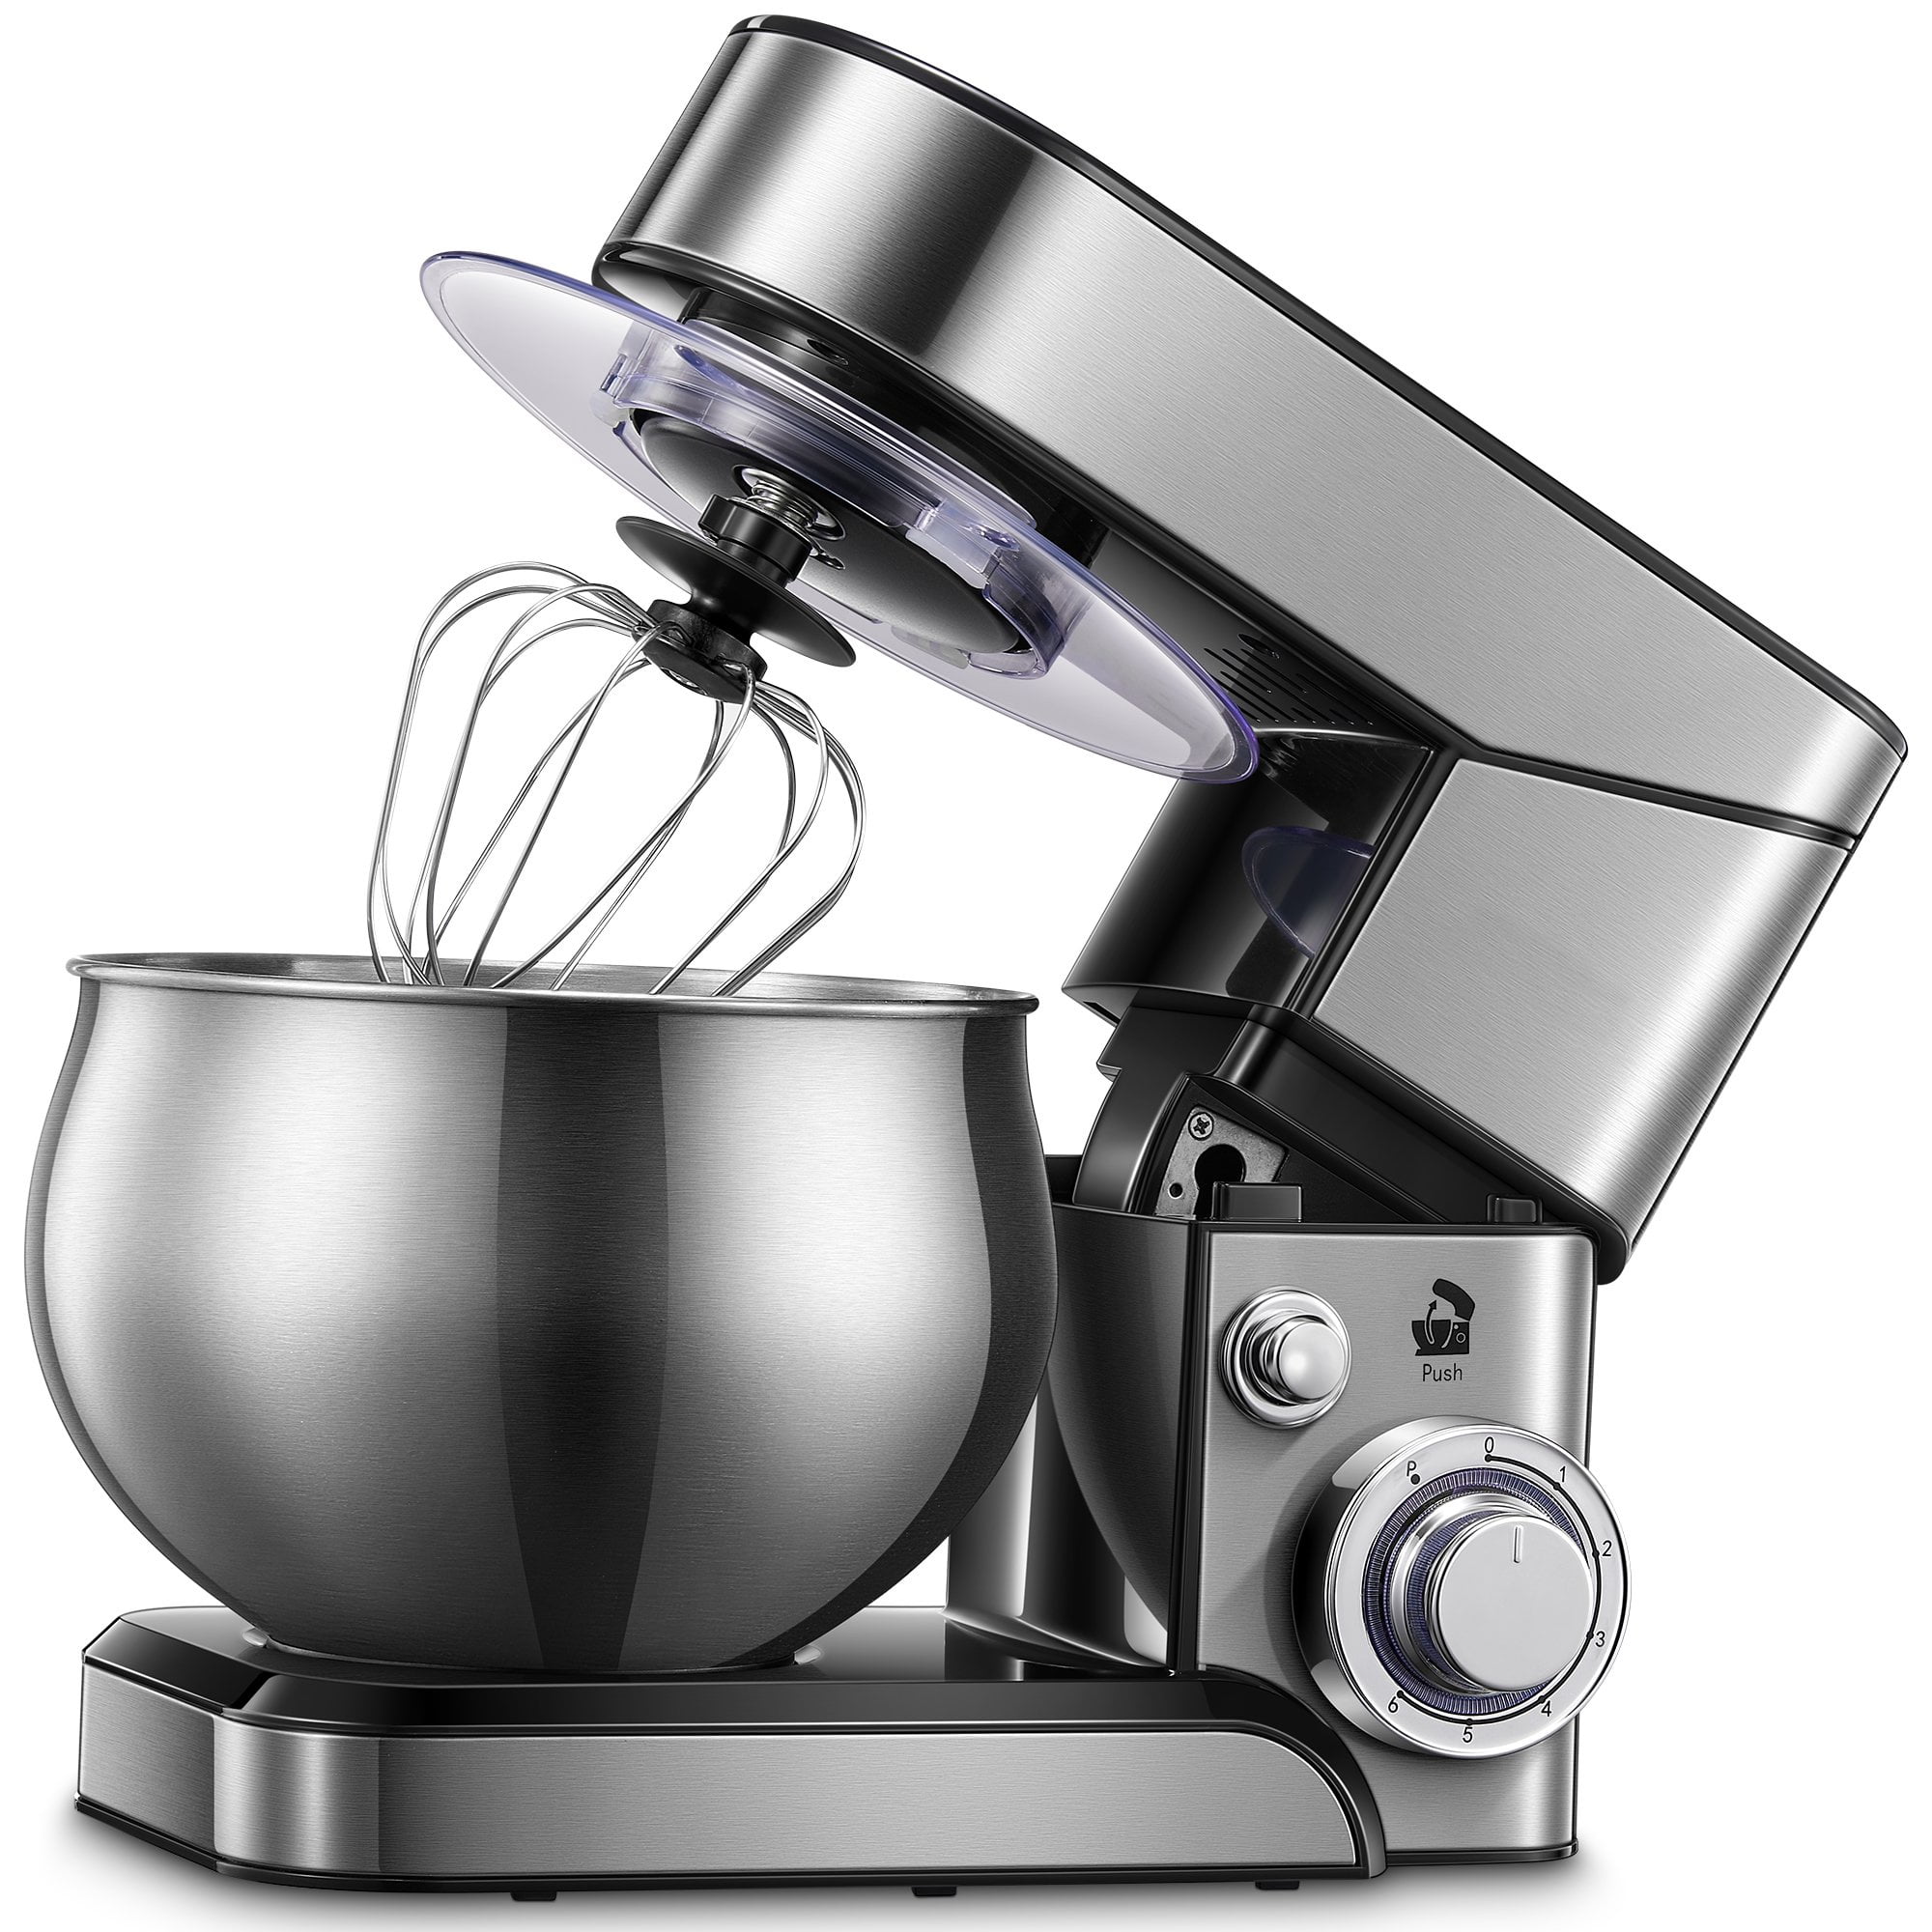  Kitchen Stand Mixer, 1700W 6-Speed ​​Motor with Stainless Steel  Bowl, 11L Large Capacity Mixer Includes Dough Hook, Flat Whisk, Dishwasher  Safe Attachments for Most Home Chefs: Home & Kitchen